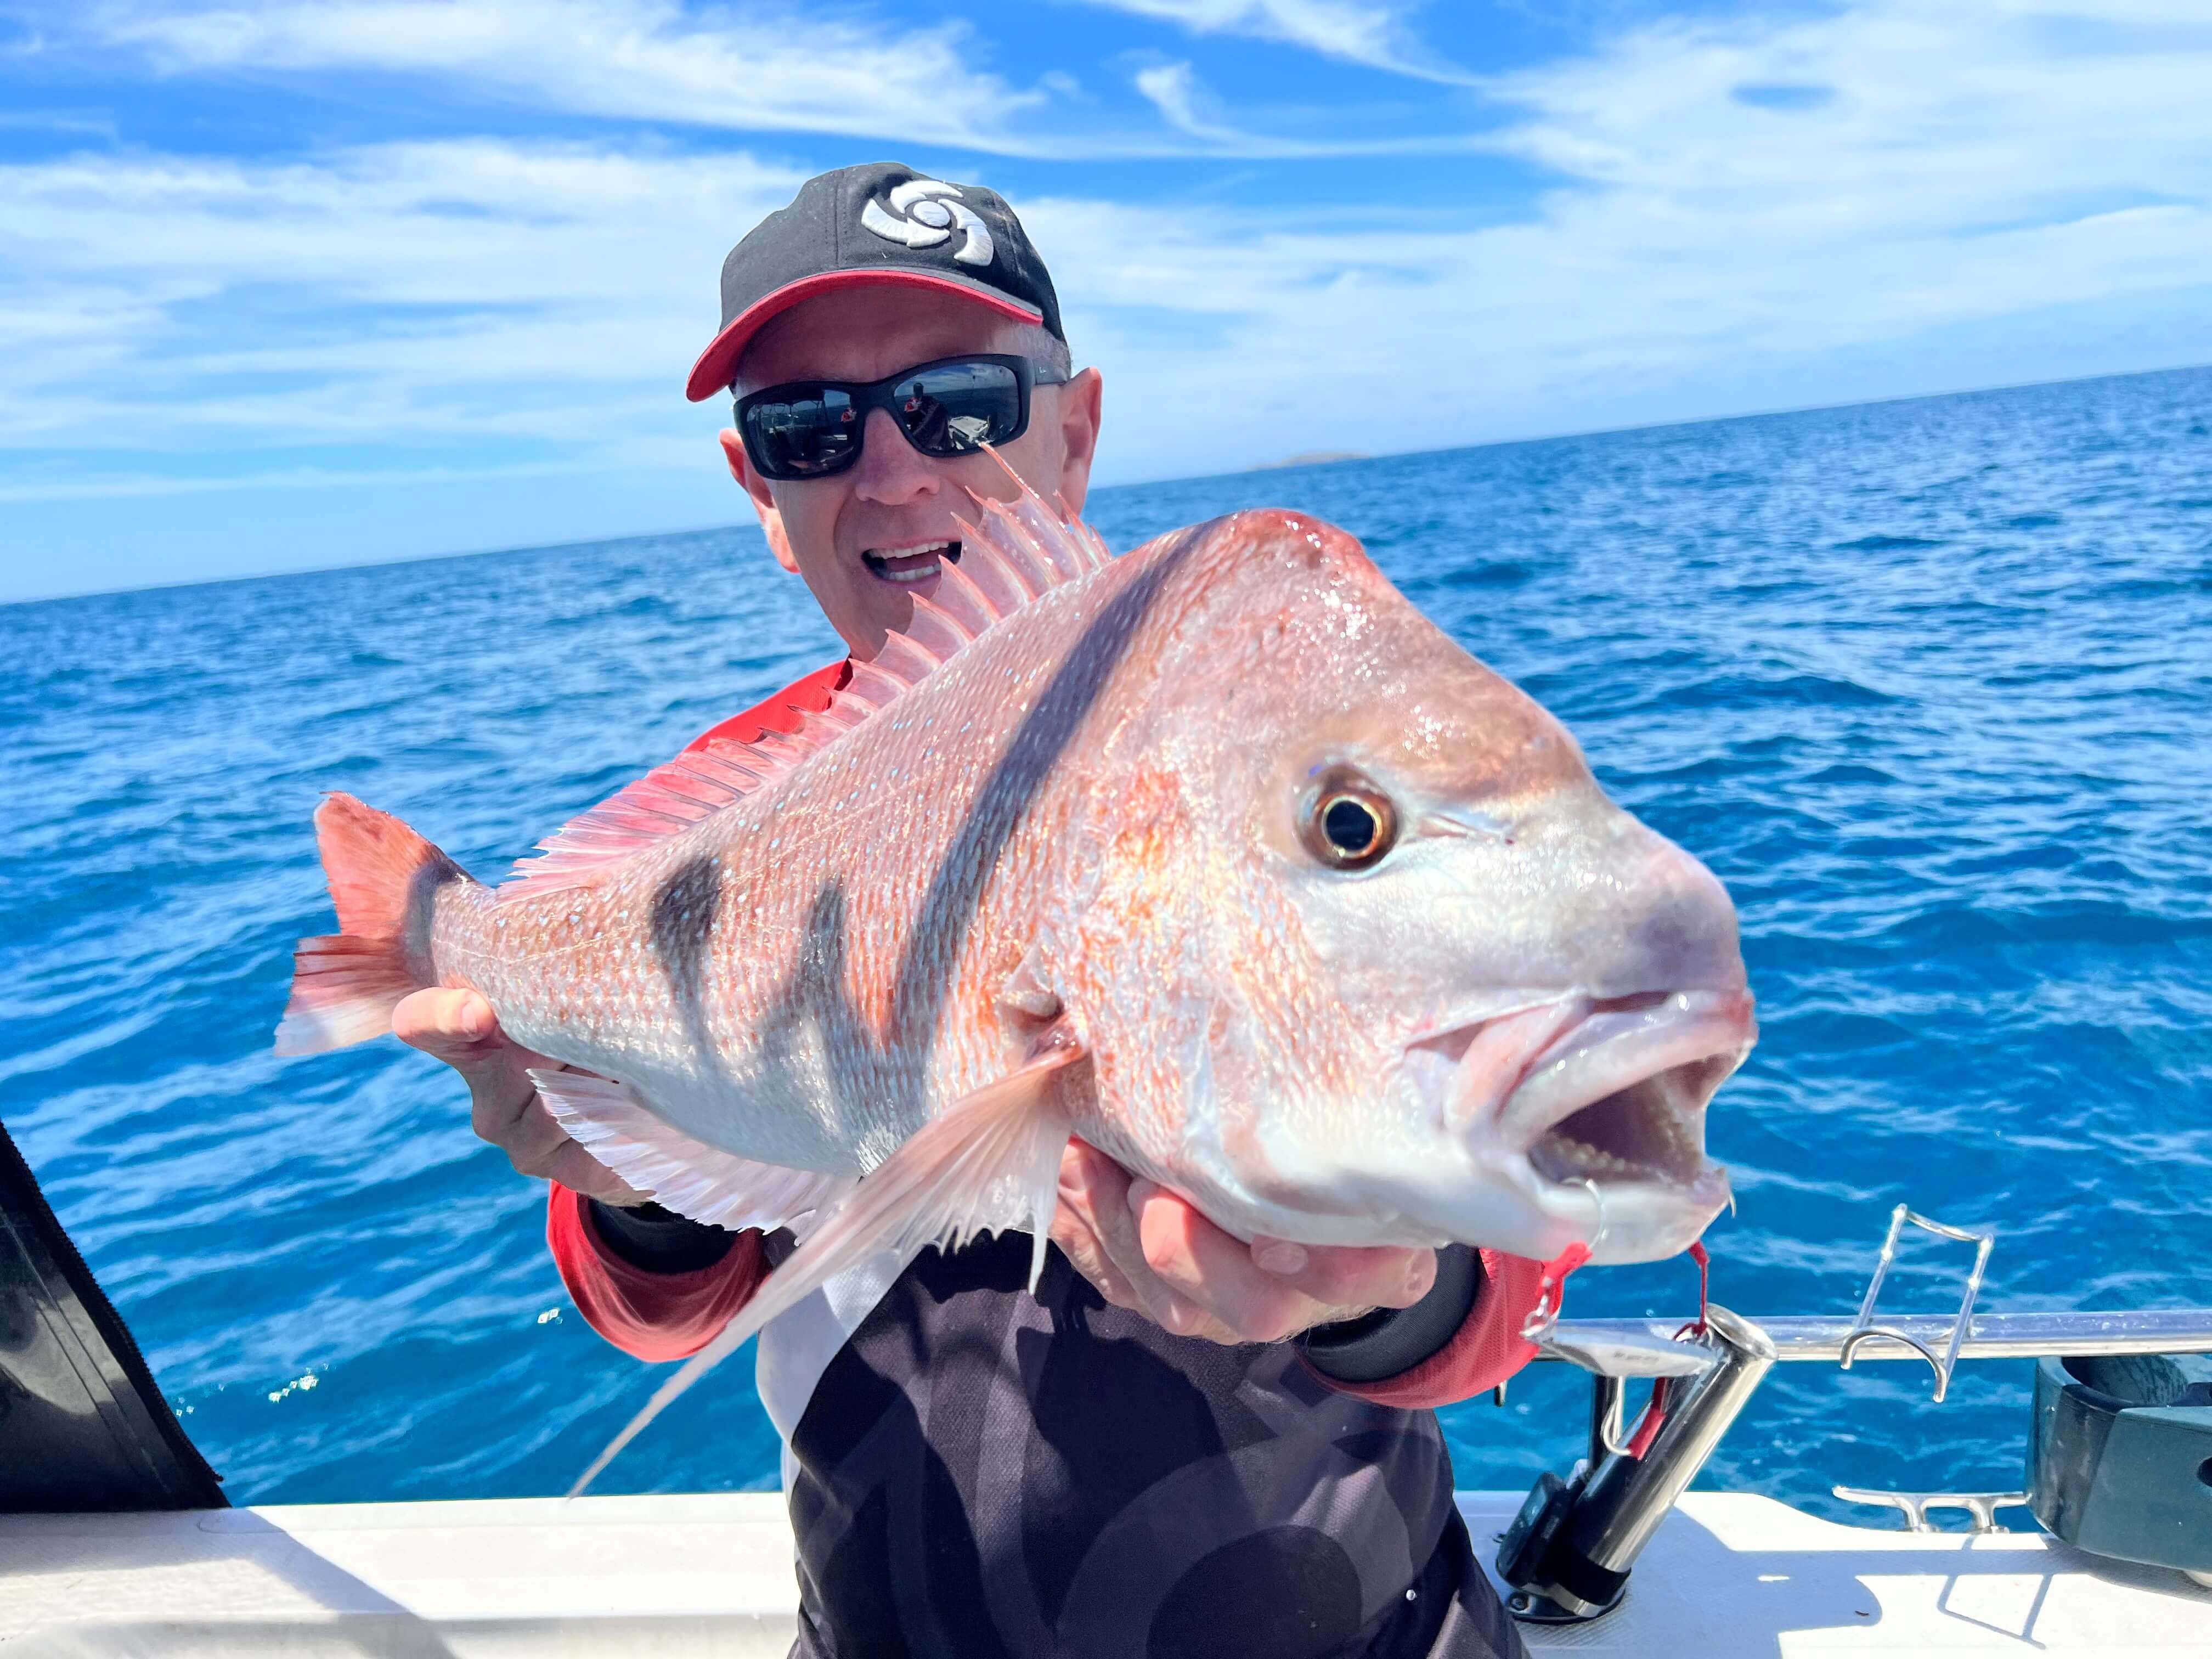 https://www.bcf.com.au/on/demandware.static/-/Library-Sites-bcf-shared-library/default/dwd4d4b762/images/blog/fishing/how-to/western-port-snapper-fergy/snapper-3.jpg